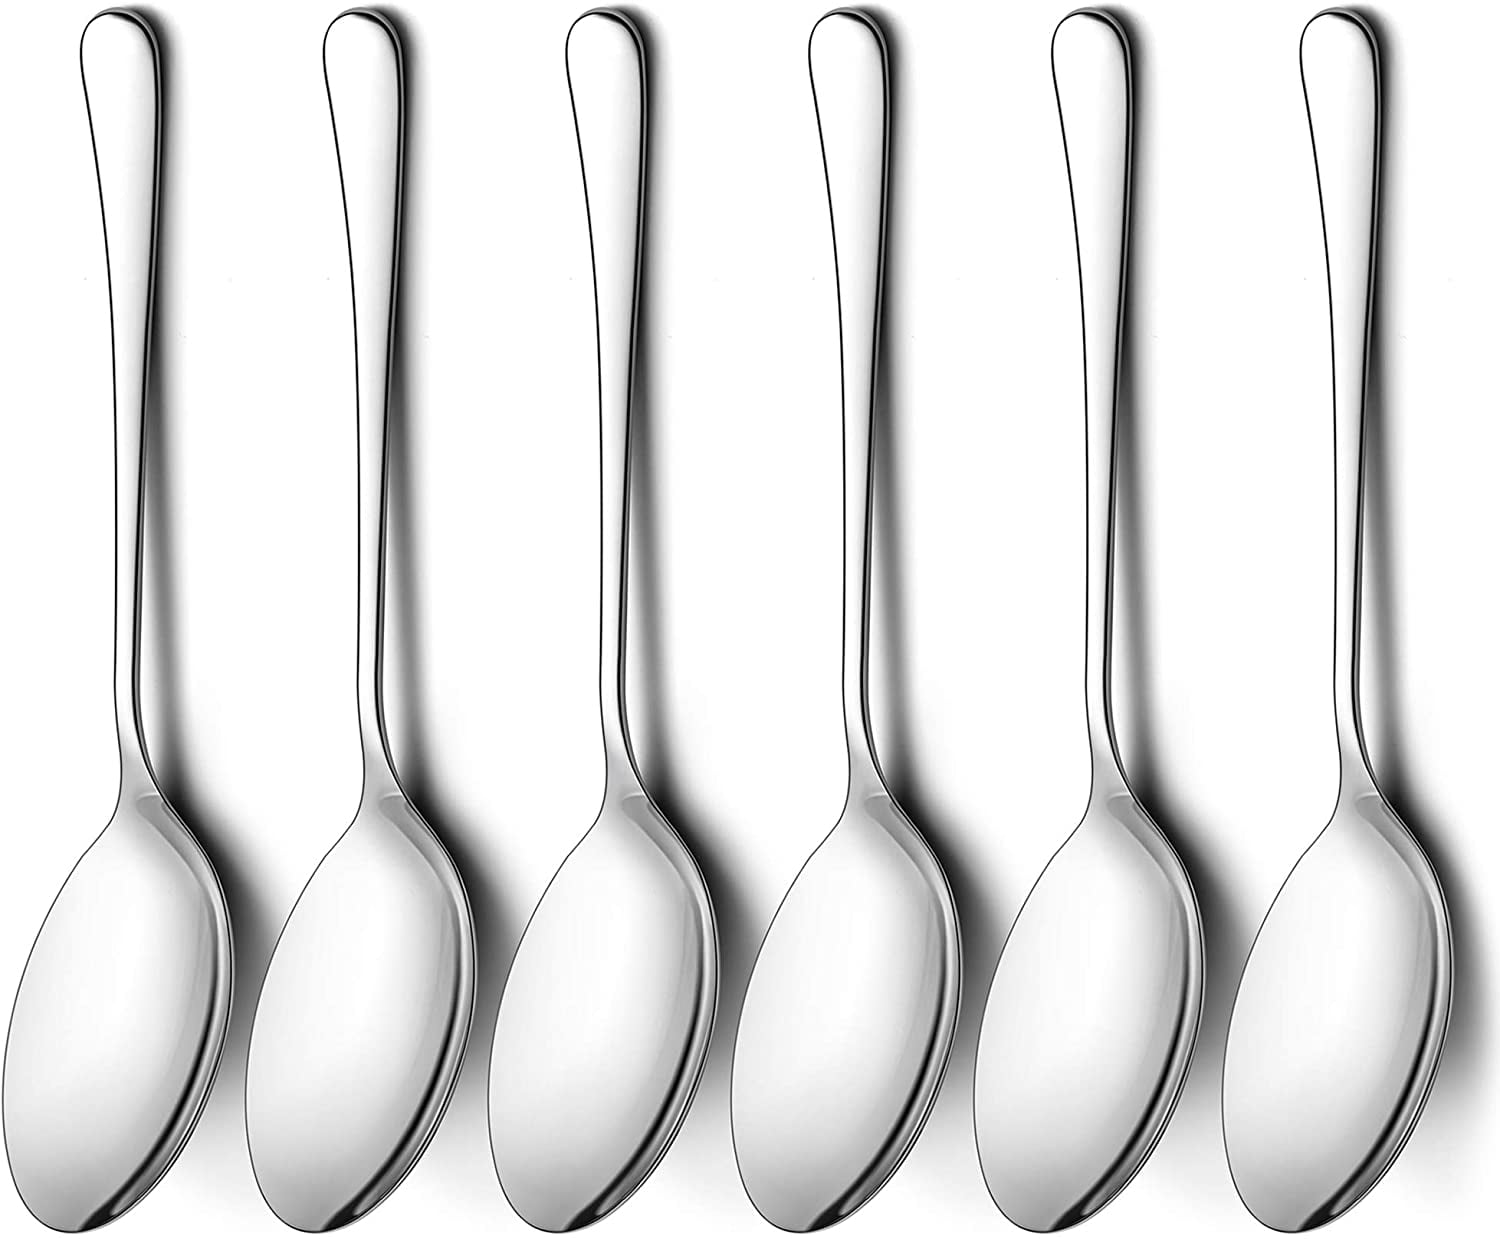 USA SELLER  10 SERVING SPOONS 13" STAINLESS STEEL FREE SHIPPING USA ONLY 